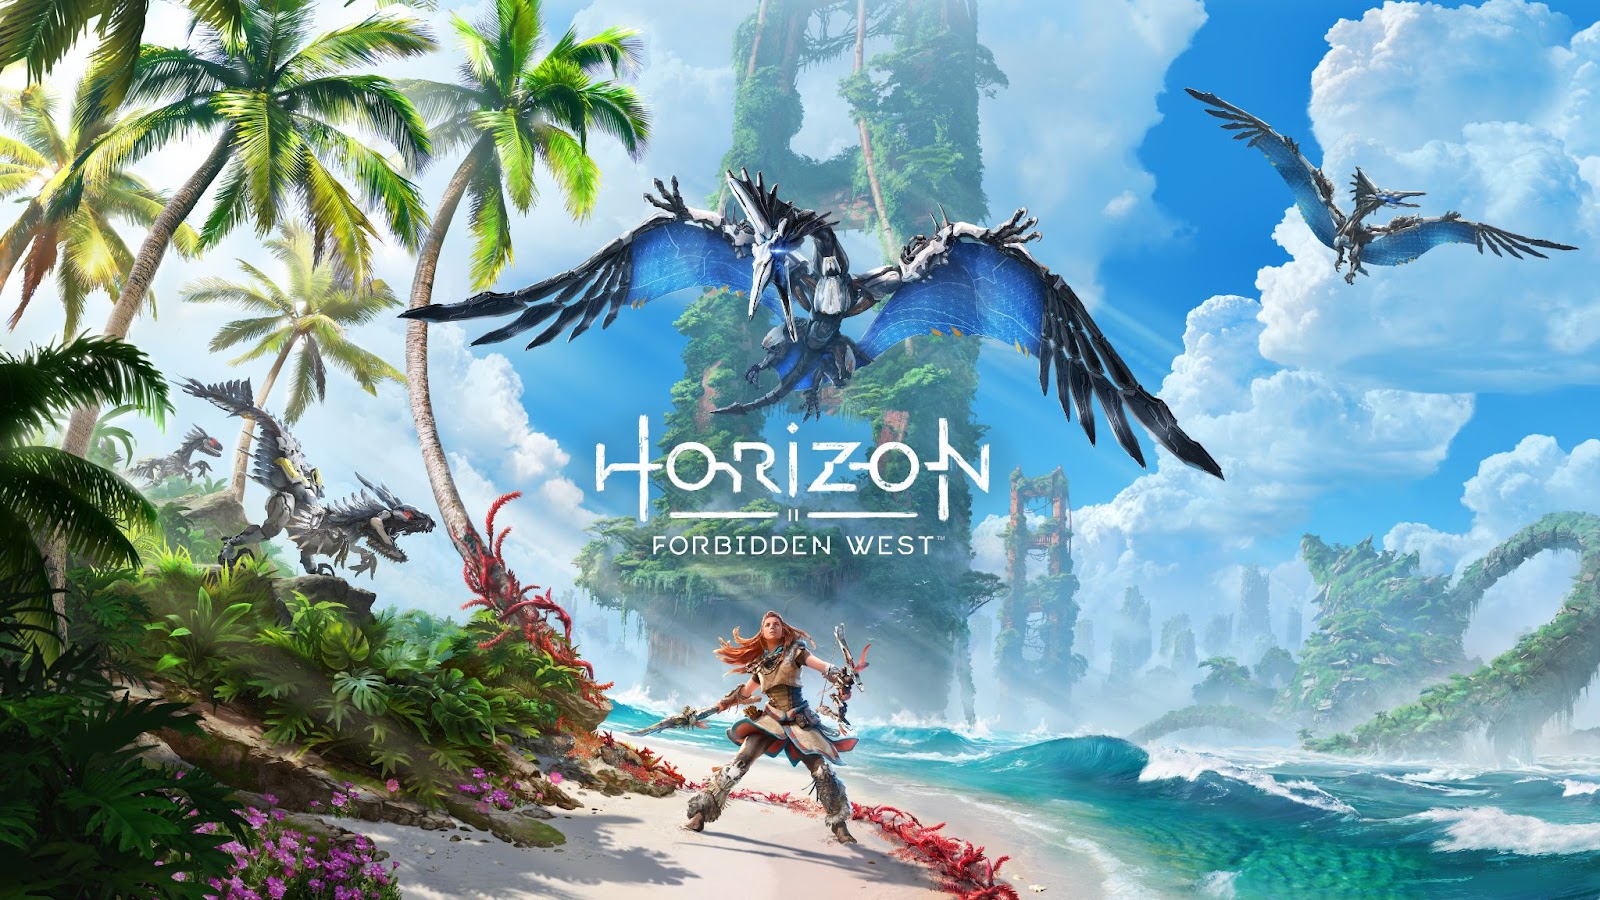 Benji-Sales on X: With nearly 100 Reviews Counted Horizon Forbidden West  and Horizon Zero Dawn have an identical Metacritic Score at 89 That's wild.  Not often you see a game and it's